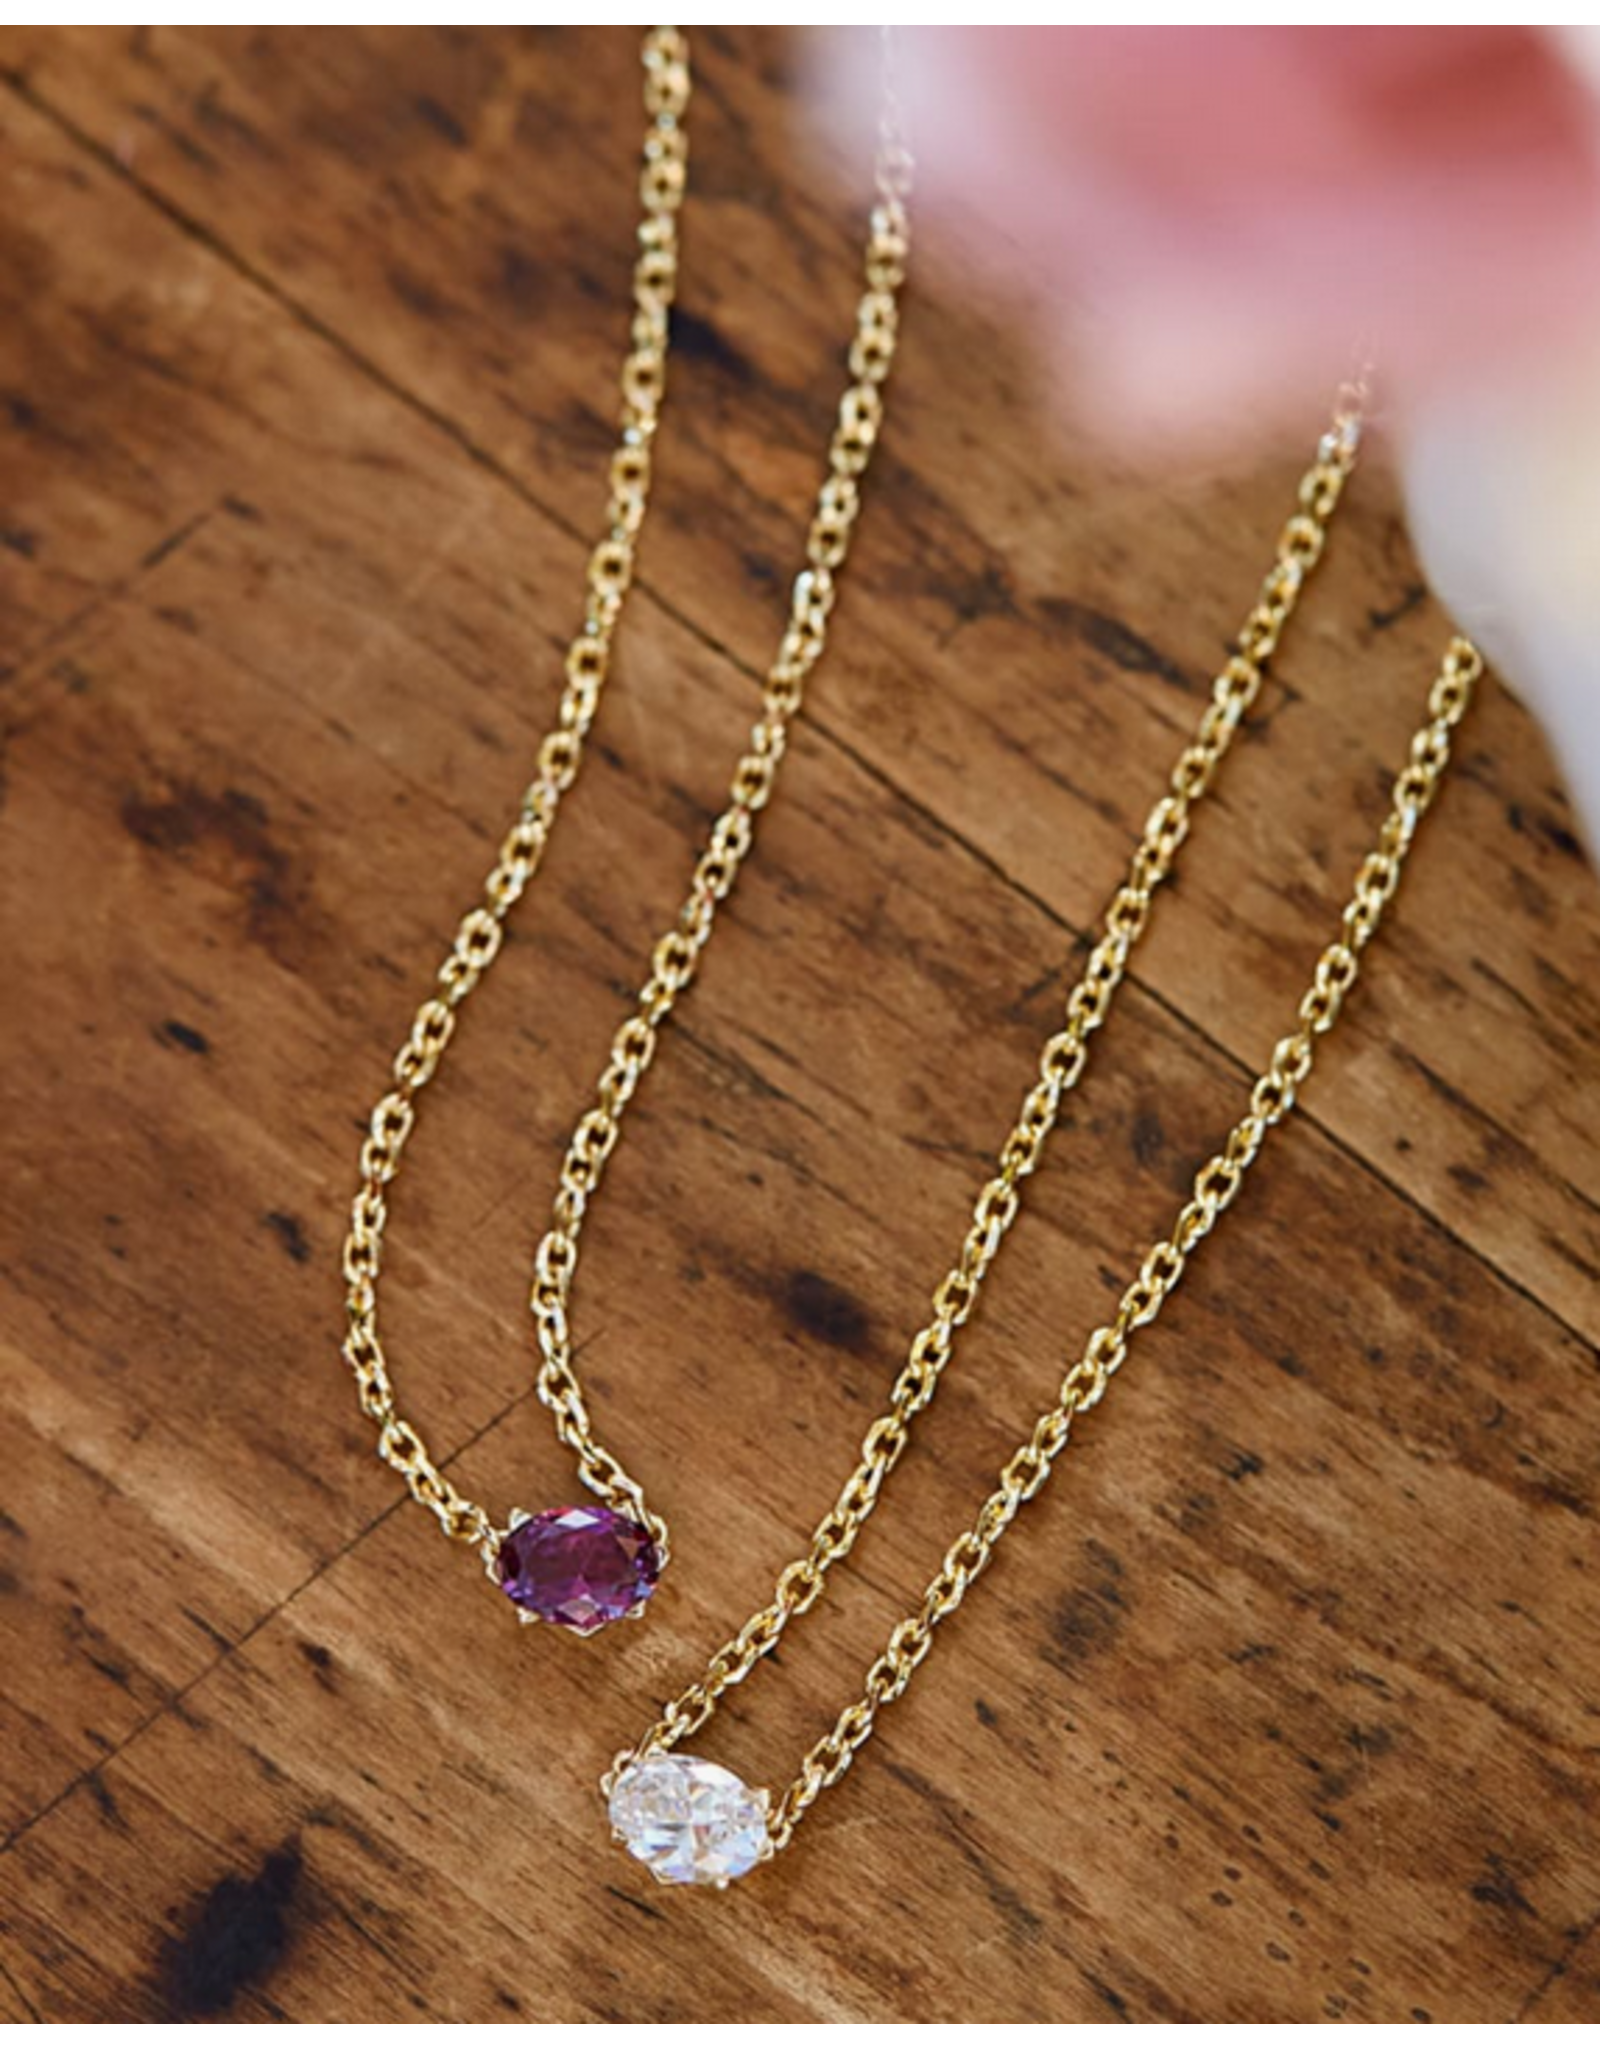 Kendra Scott Cailin Necklace Purple Crystal on Gold (FEB.)